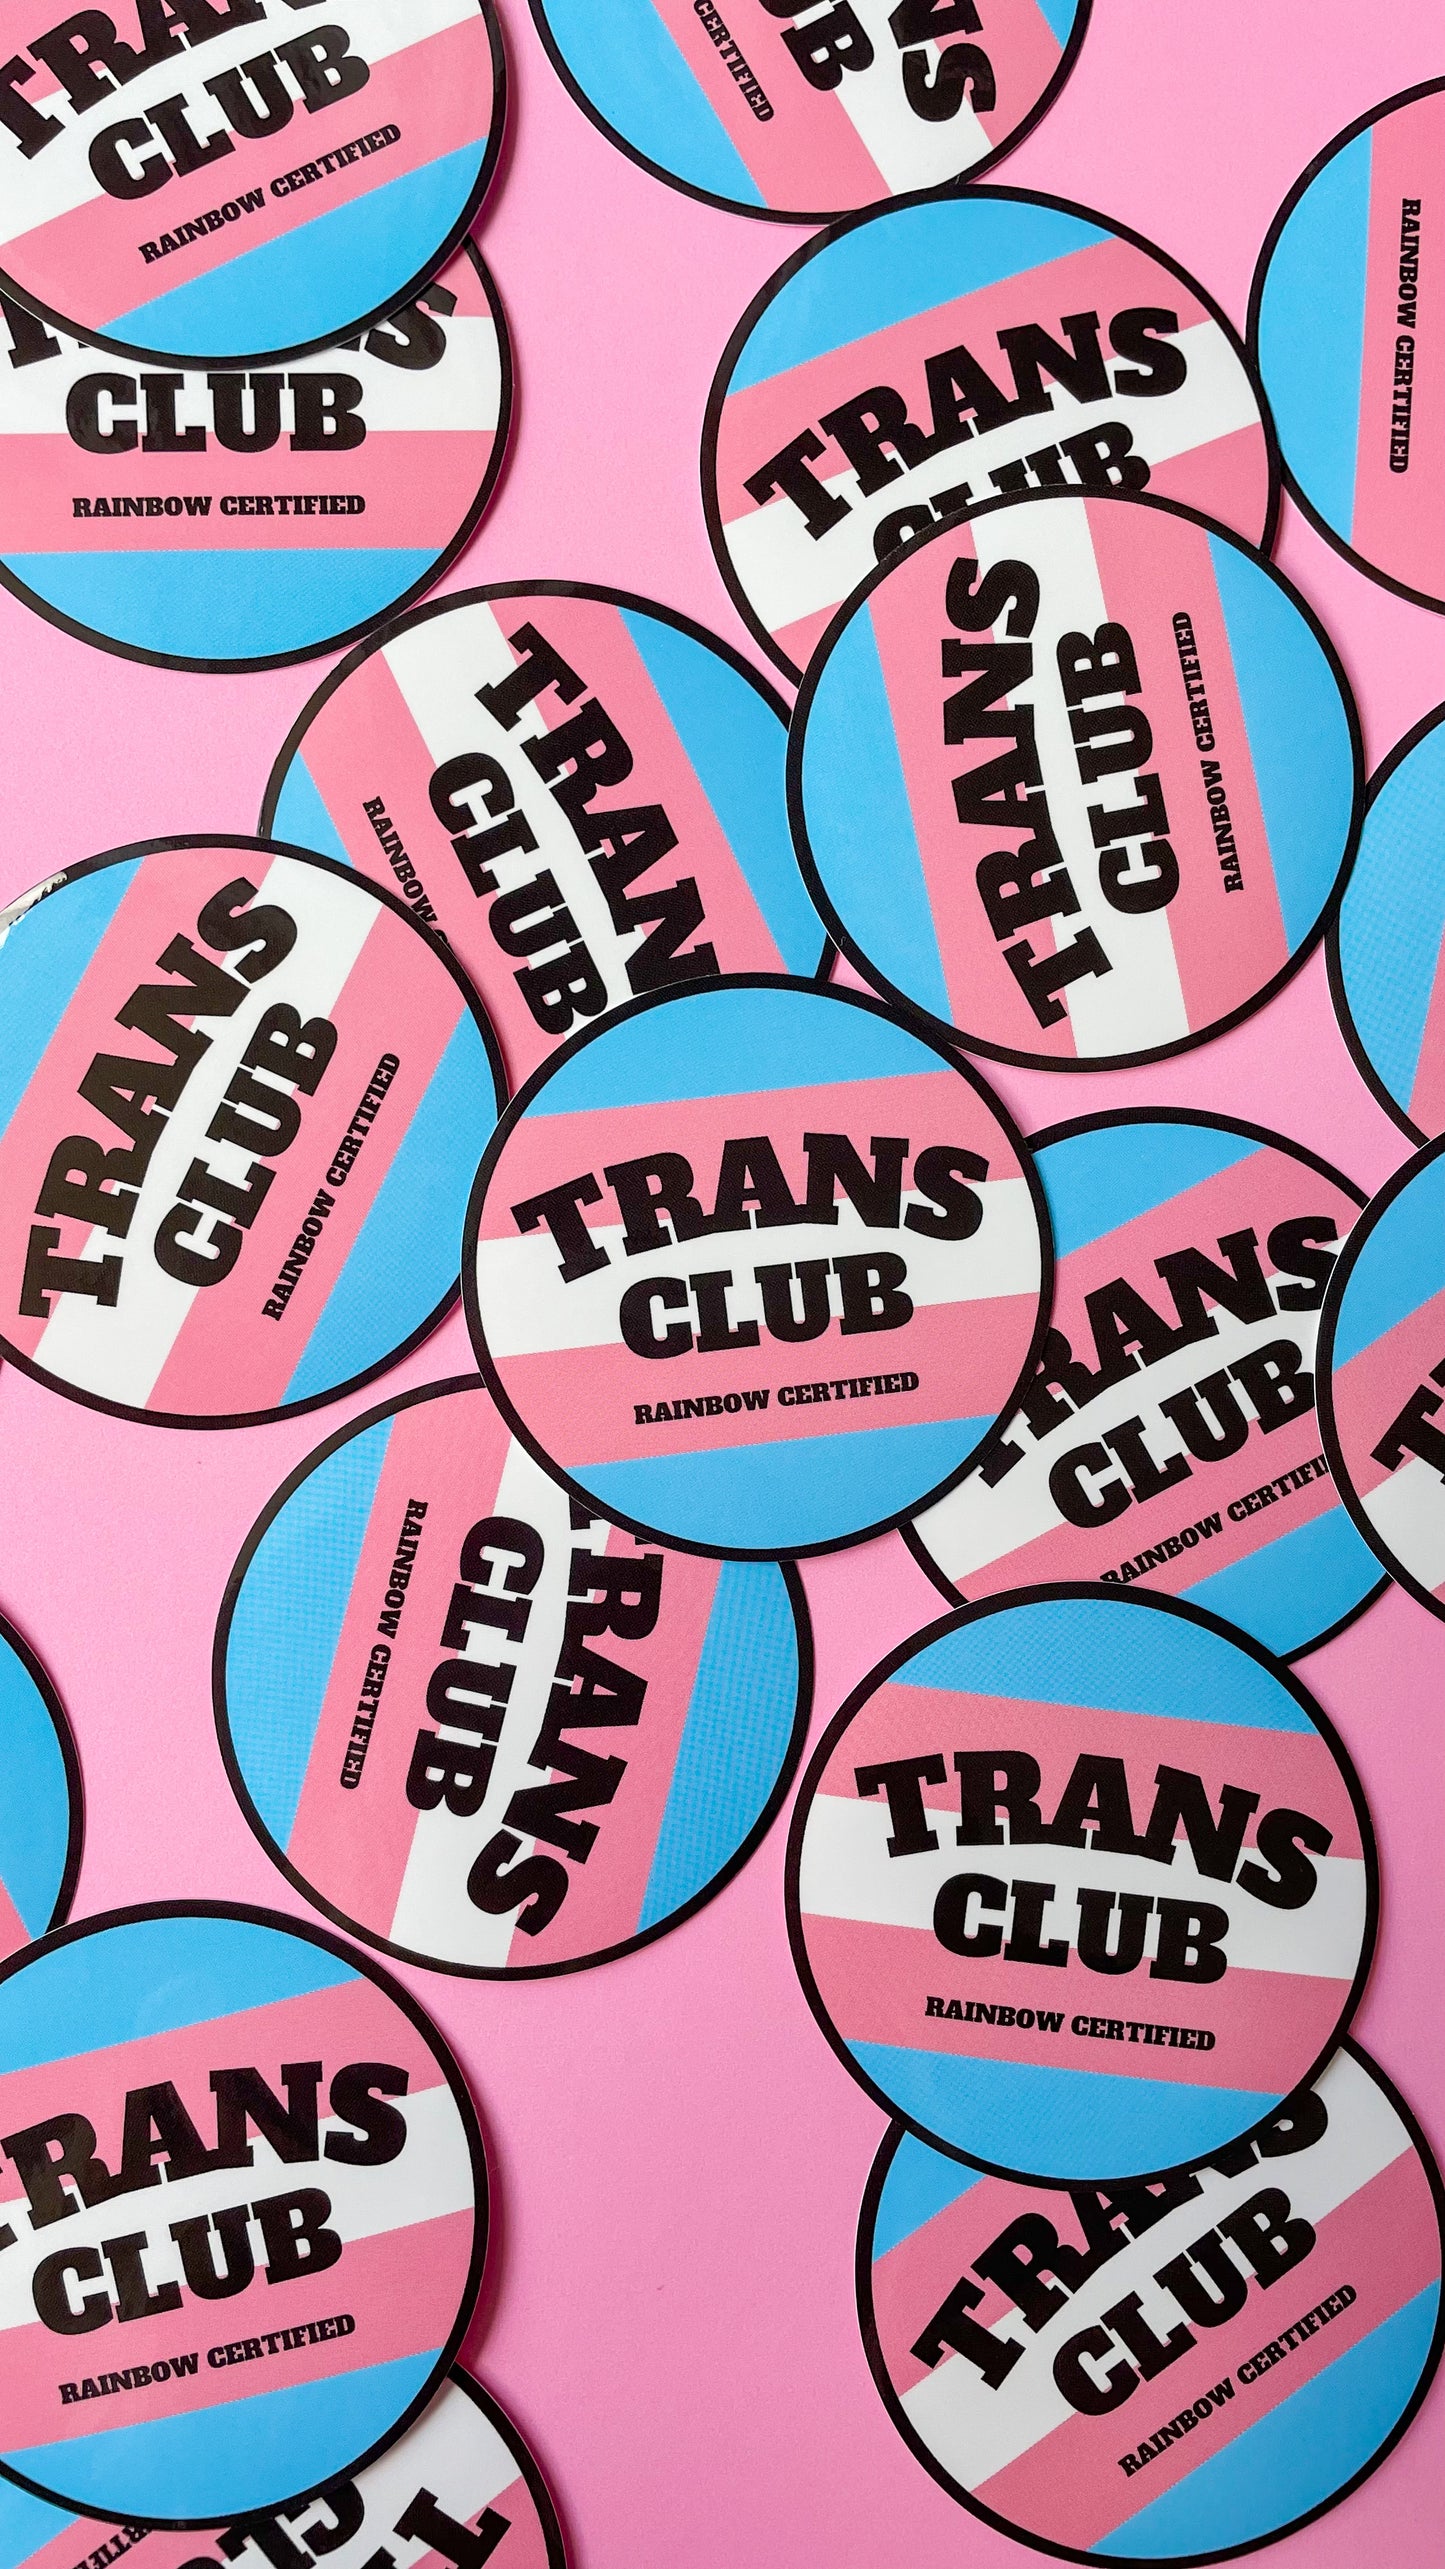 circle sticker that says trans club with Transgender pride flag